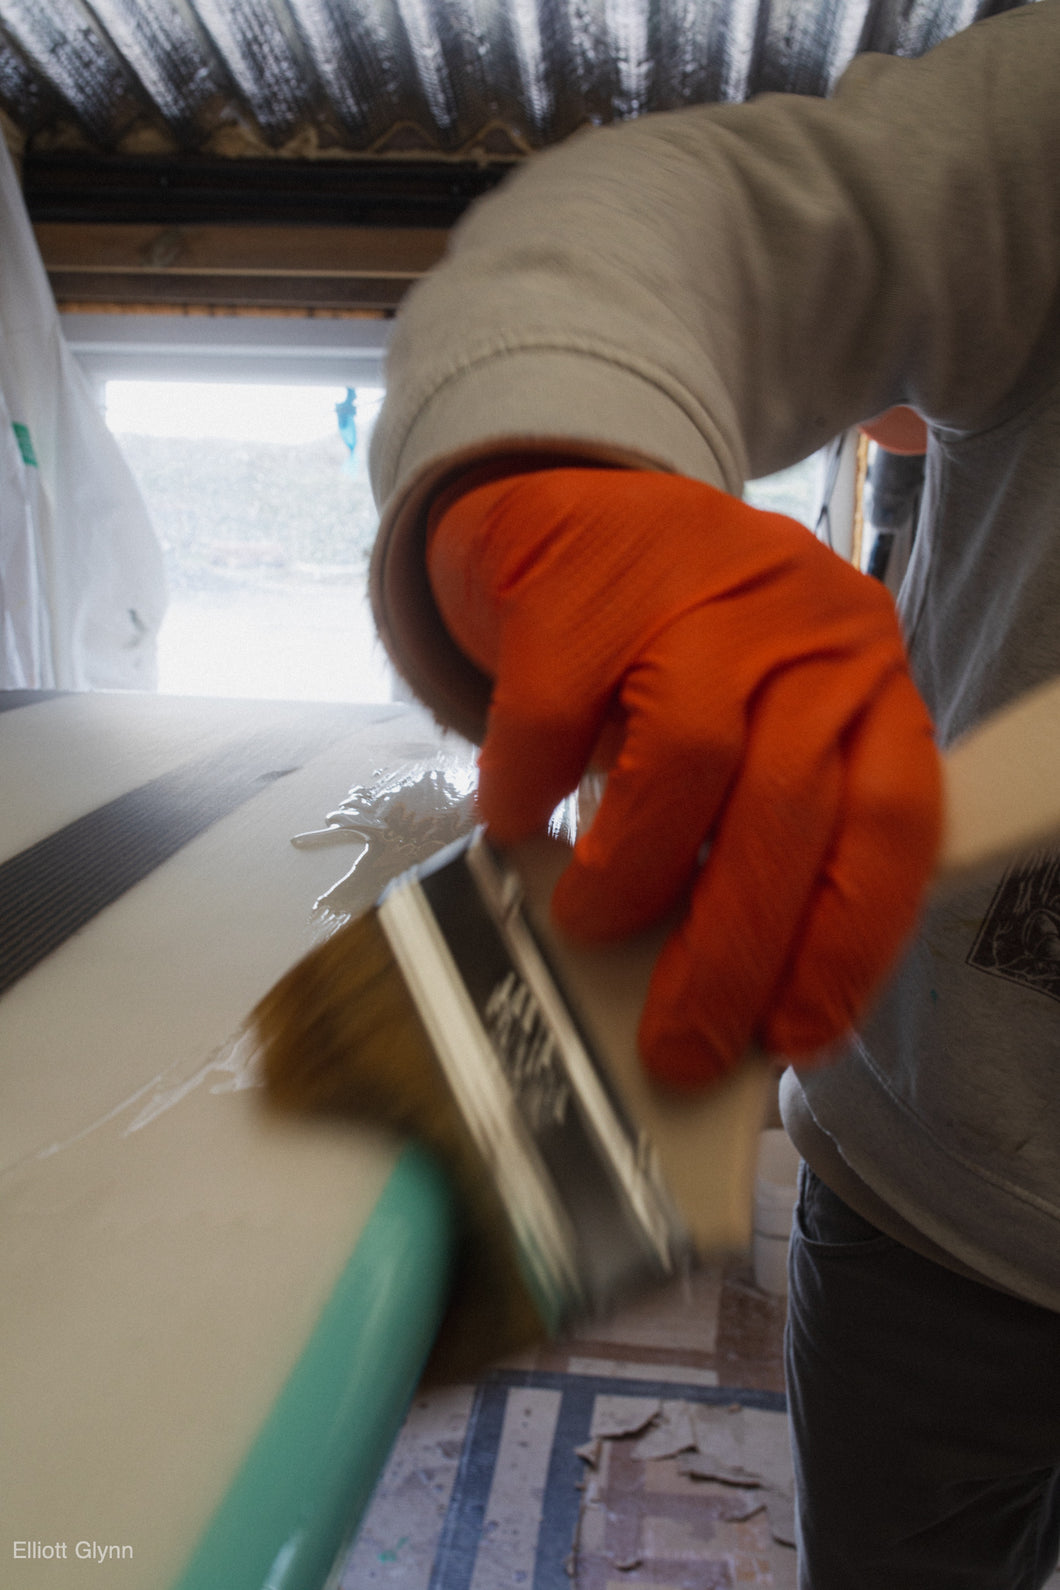 Build your own surfboard workshop - Cornwall - Predn Surf Co